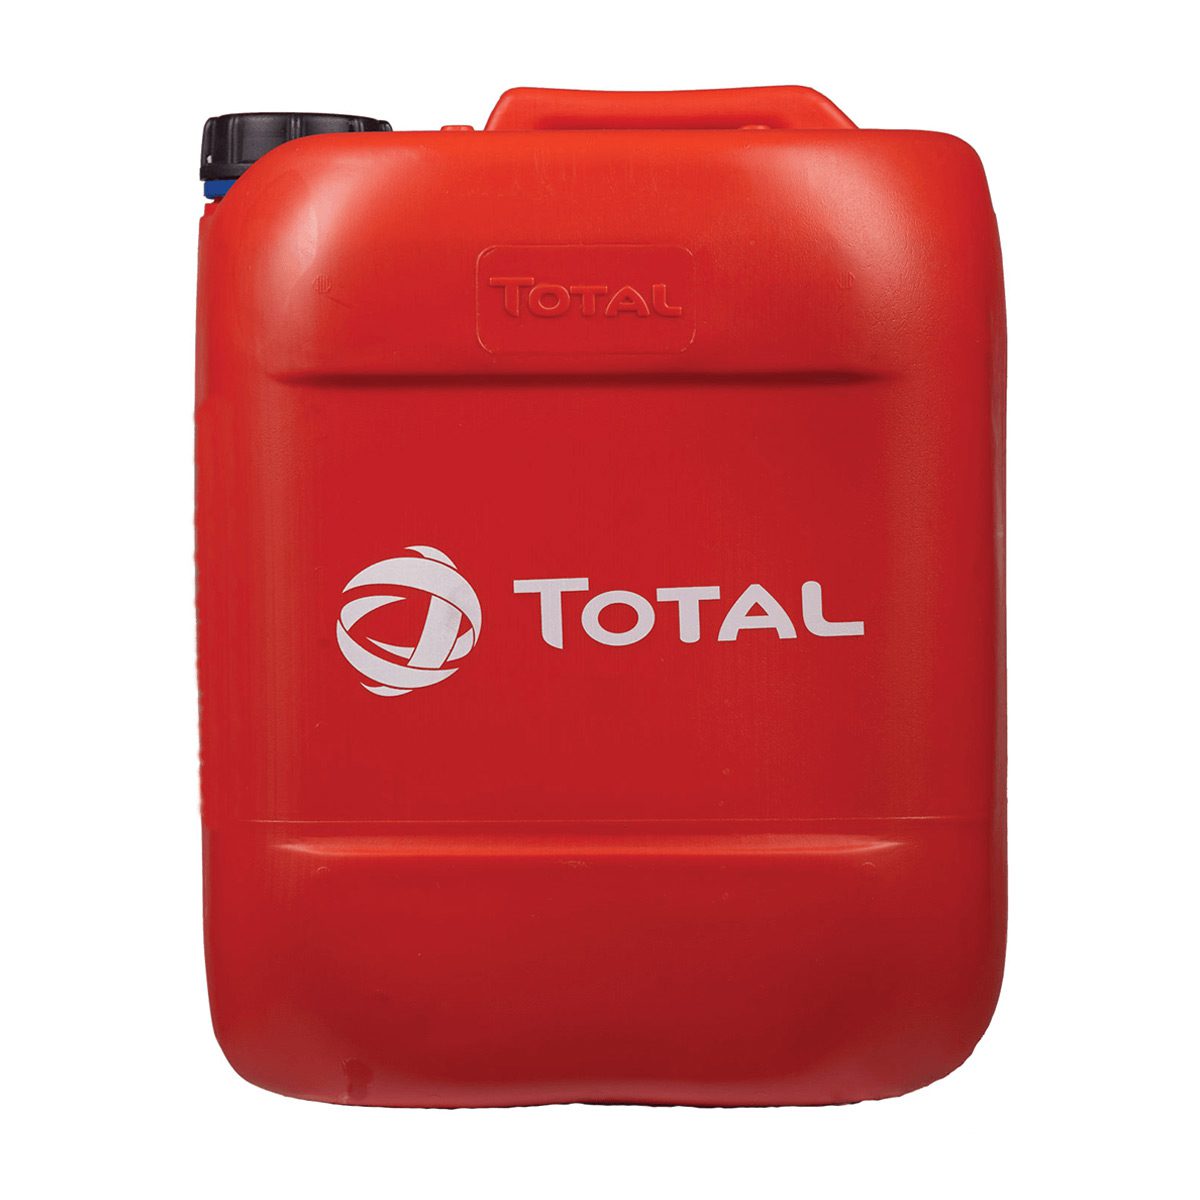 oil-lubricants-engine-rubia-tir7400-15w40-oil-5L—litre-mineral-lubricant-used-on-road-diesel-technology-excellent-viscosity-stability-engine-lubrication-severe-conditions-vjs-distributors-TO10005